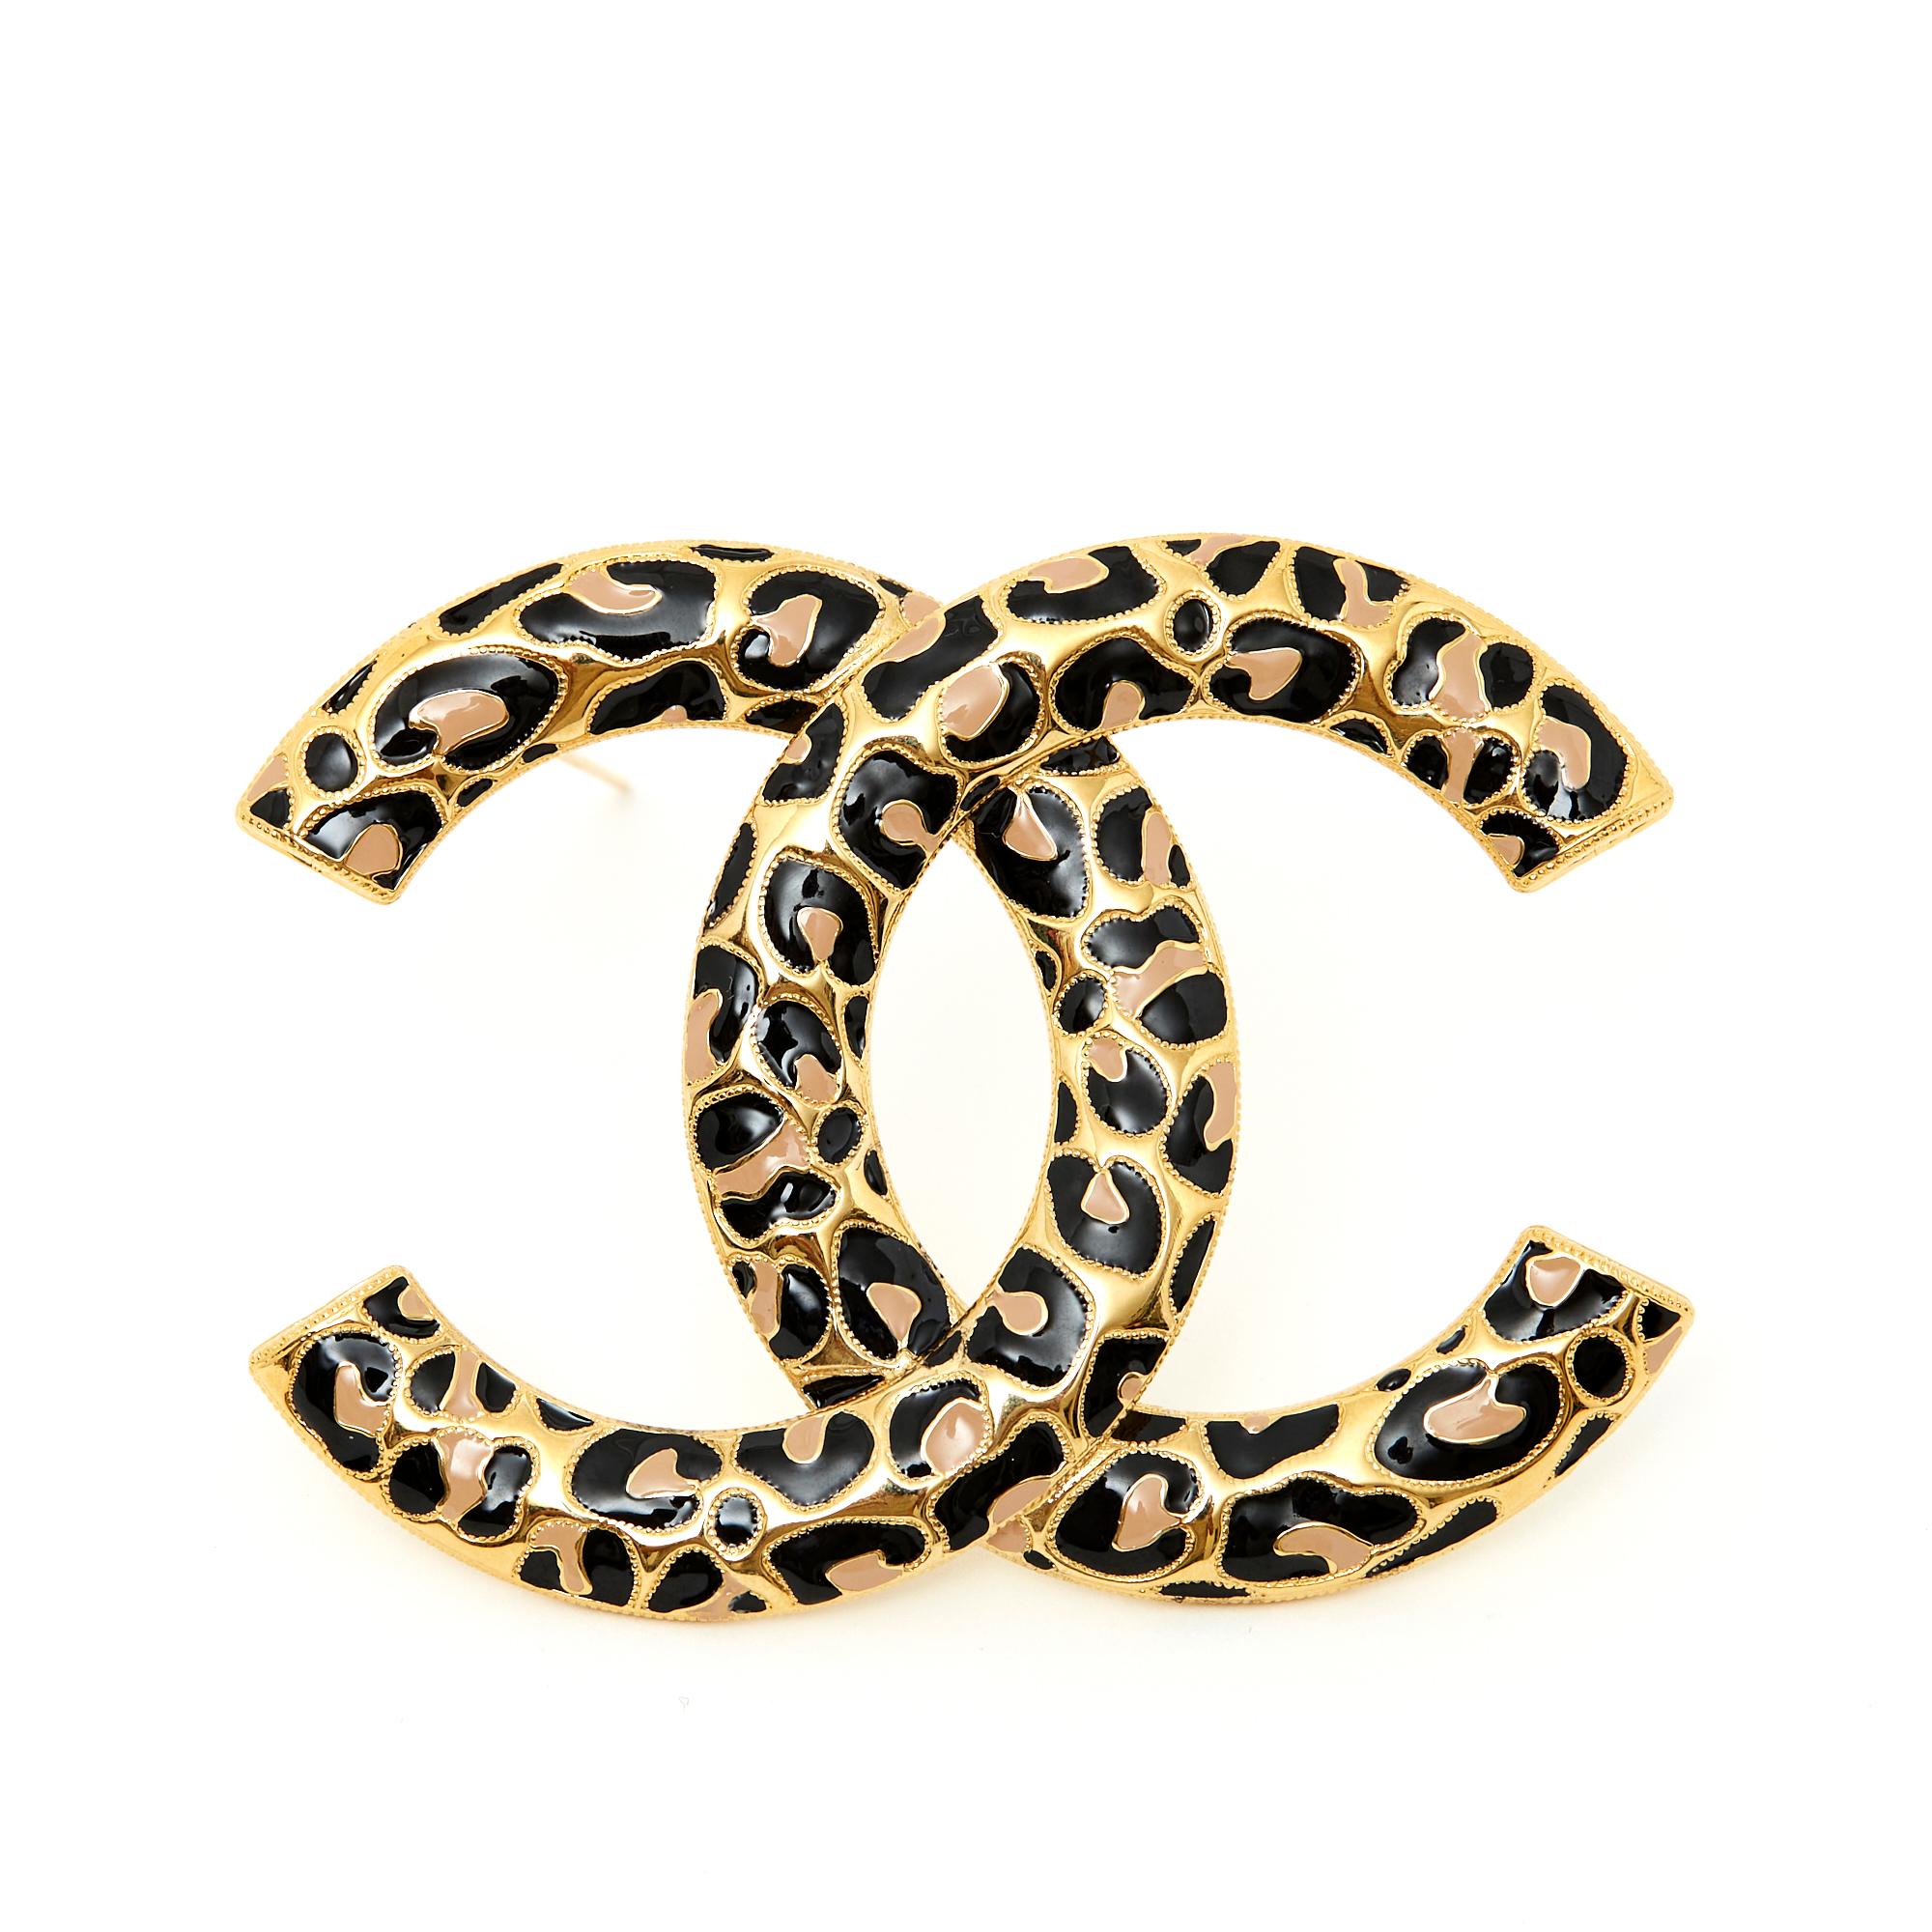 Set of 2 Chanel brooches from the Fall Winter 2022 collection, with the motif of a CC logo in panther enameled gold metal, one medium size and the other maxi size. XXL format brooch : Width 8 cm x height 6 cm ; M format brooch : Width 5.5 cm x